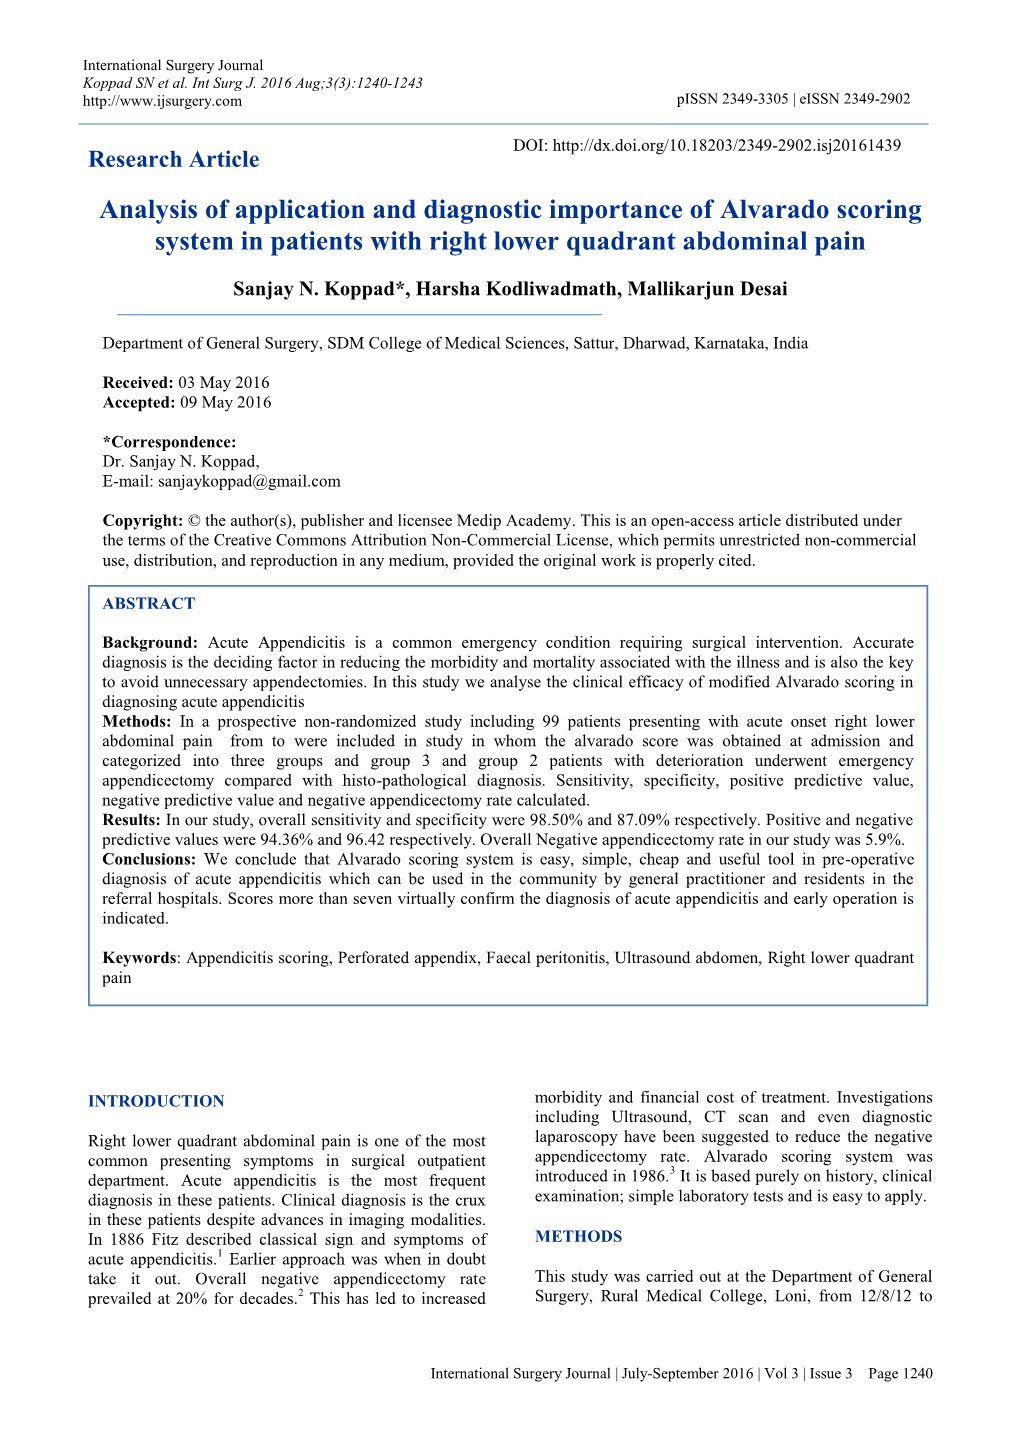 Analysis of Application and Diagnostic Importance of Alvarado Scoring System in Patients with Right Lower Quadrant Abdominal Pain